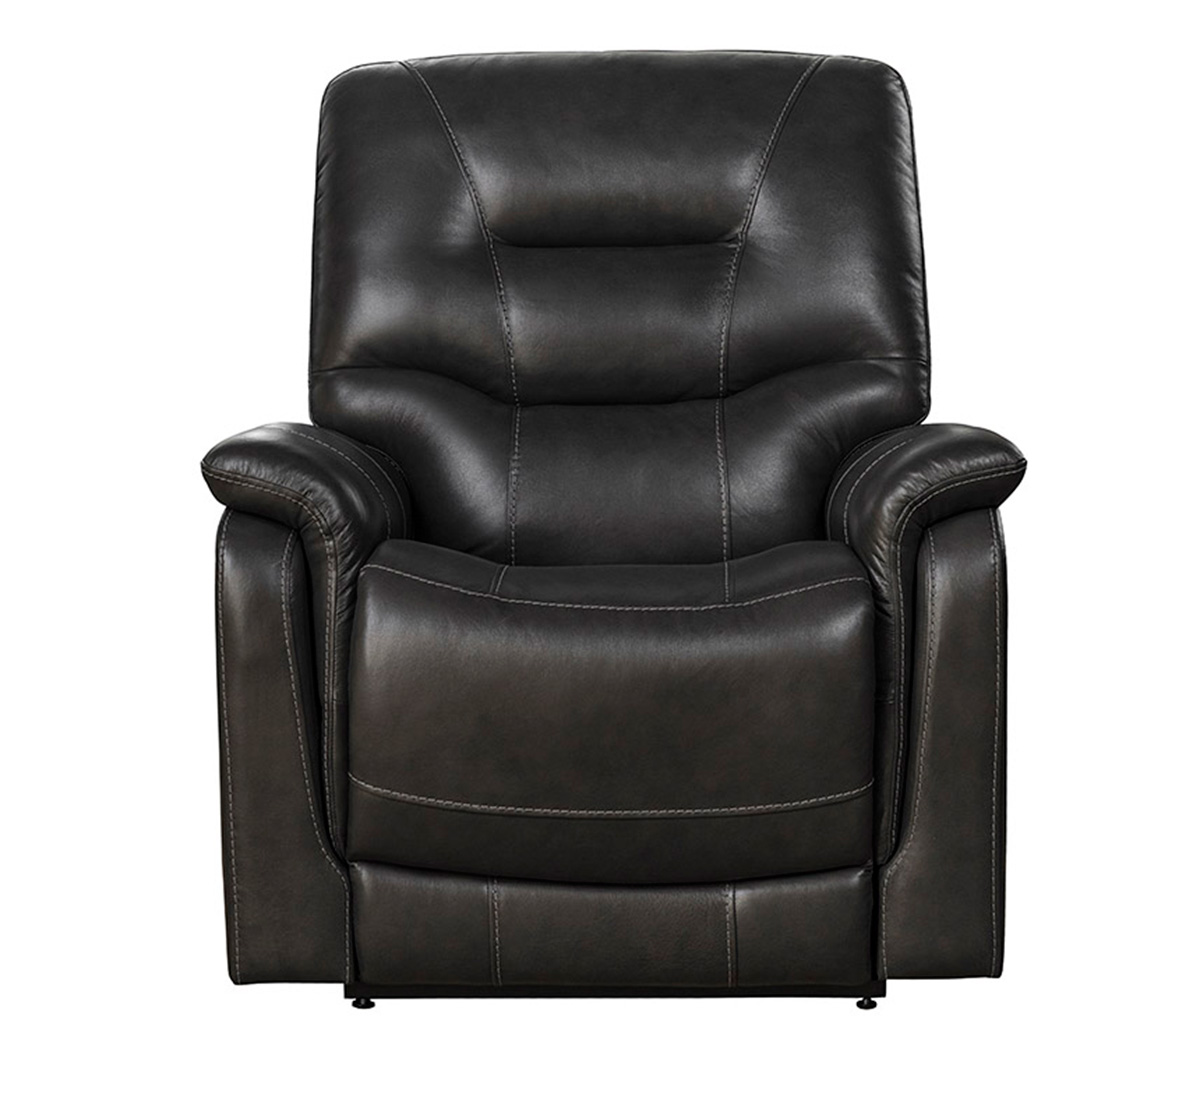 Barcalounger Lorence Lift Chair Recliner with Power Head Rest - Venzia Grey/Leather Match